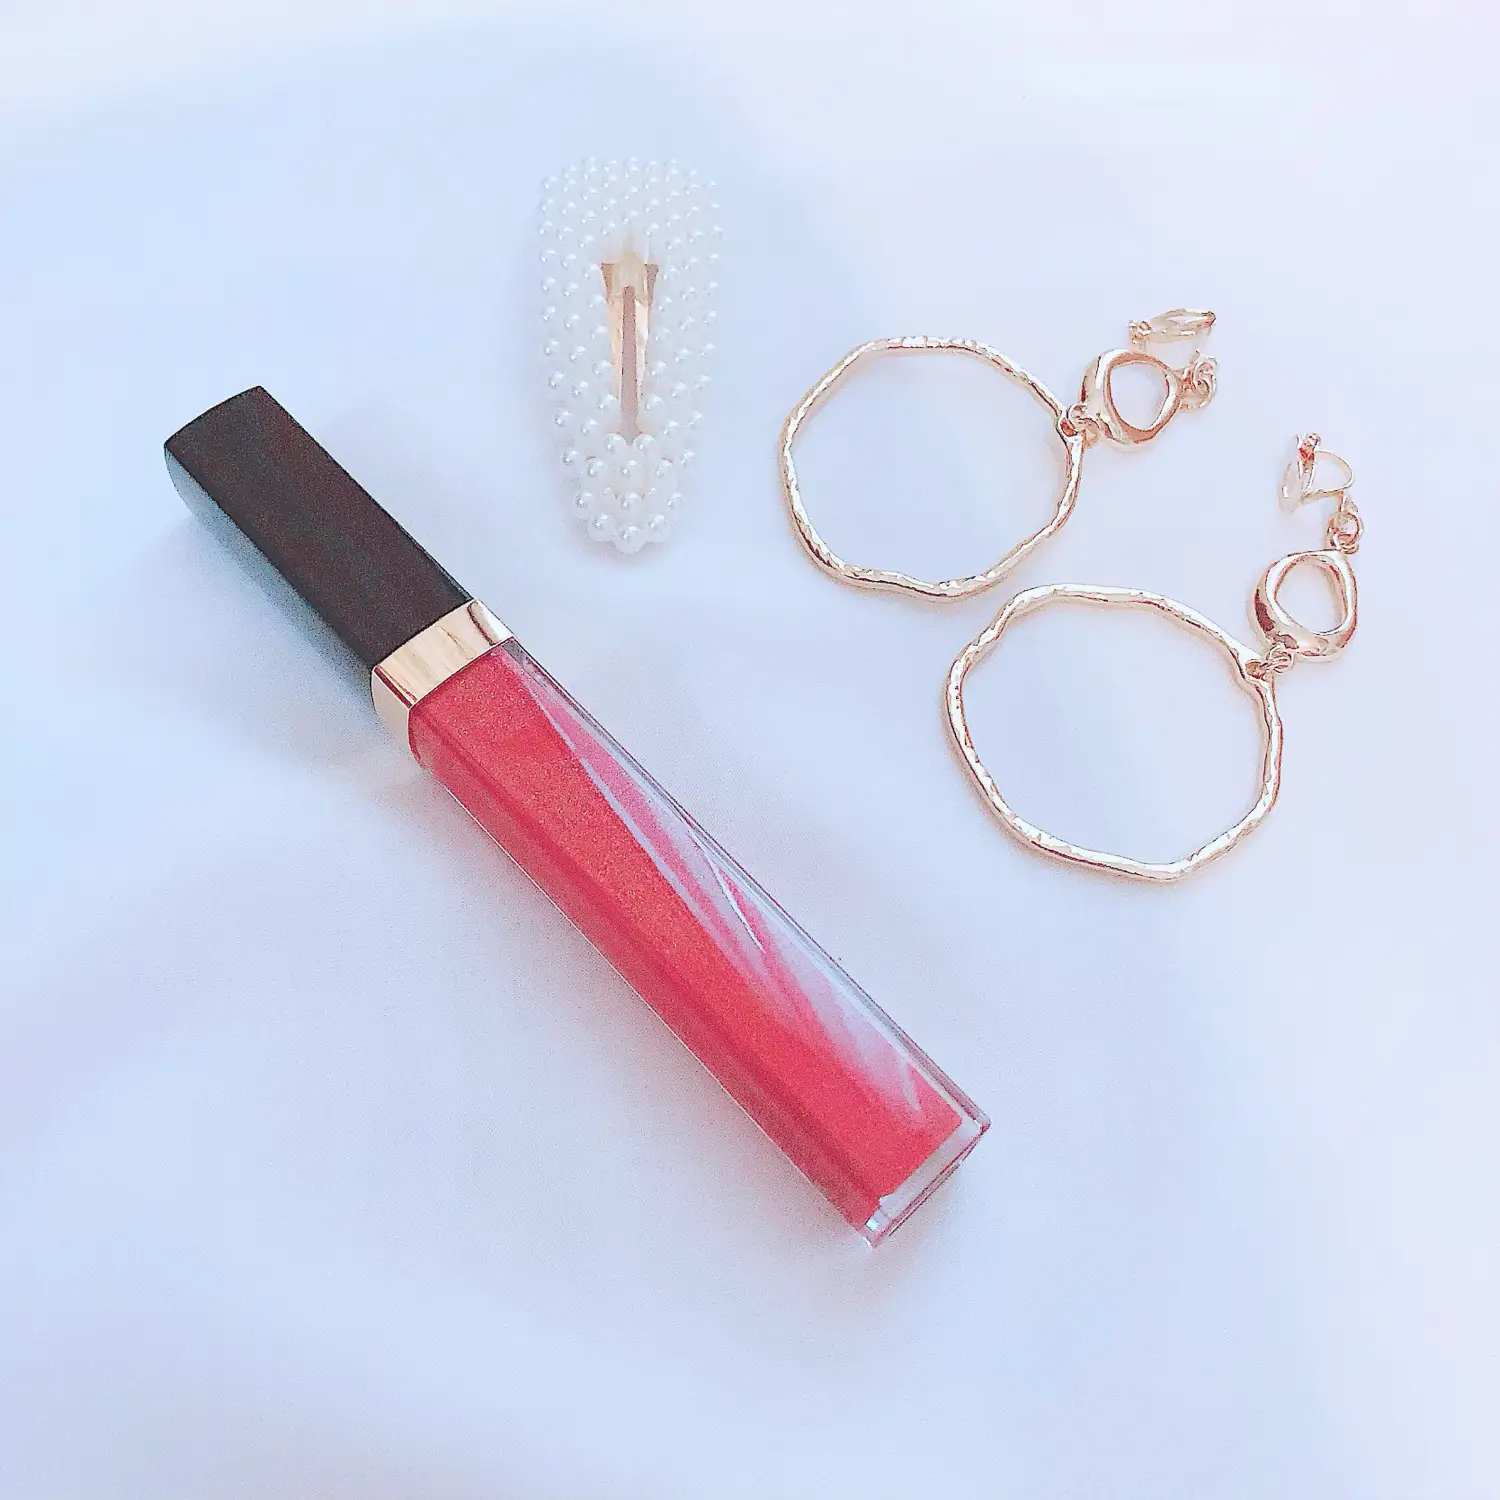 Recommended by Brevet Natsu] CHANEL Rouge Coco Gloss is cute